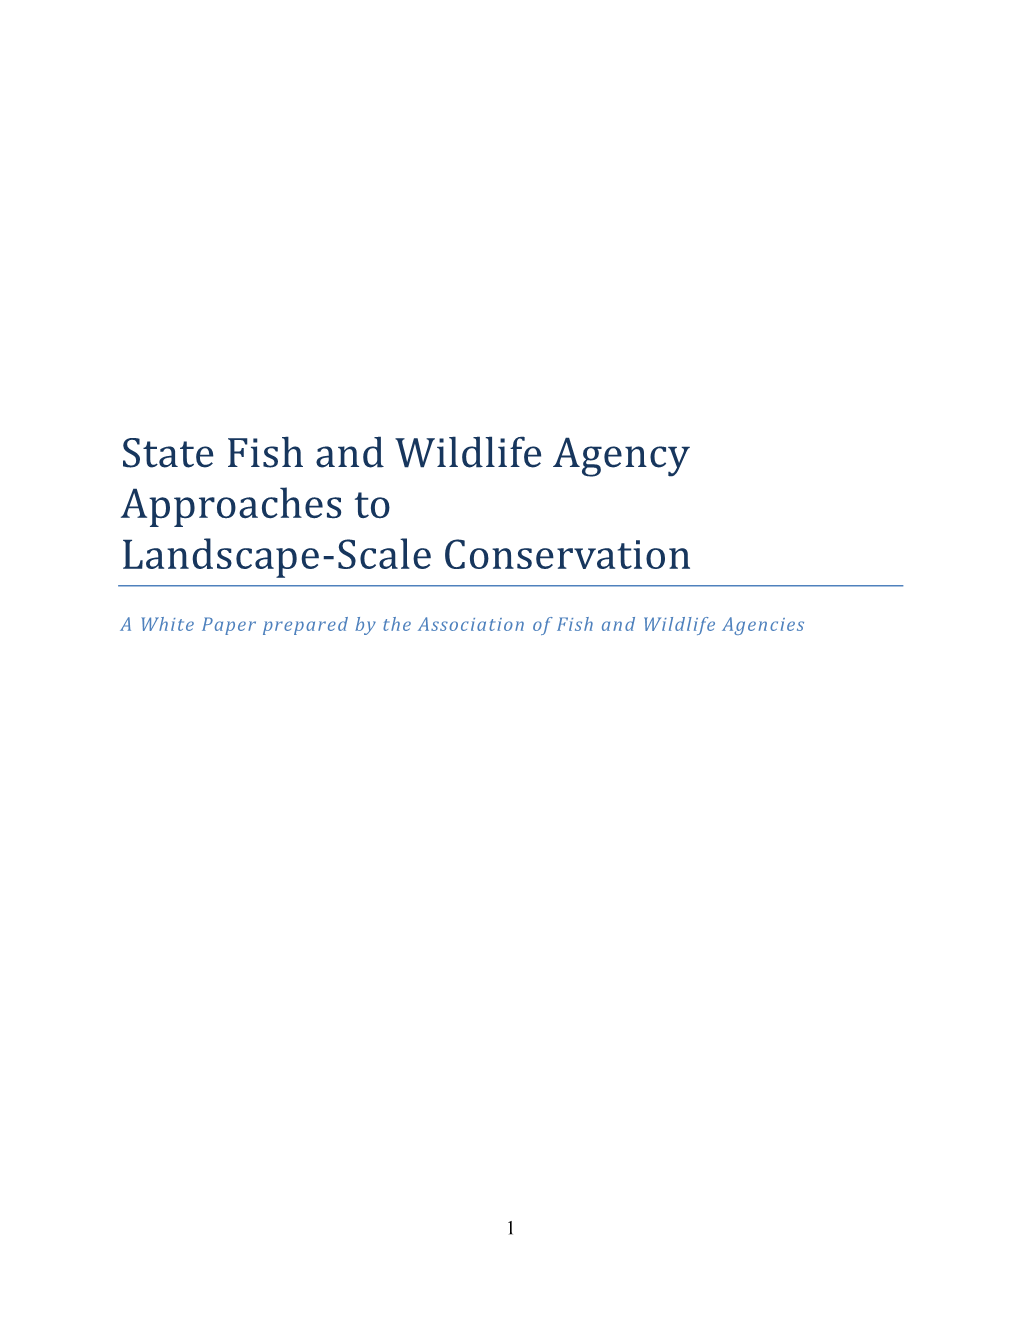 State Fish and Wildlife Agency Approaches to Landscape-Scale Conservation